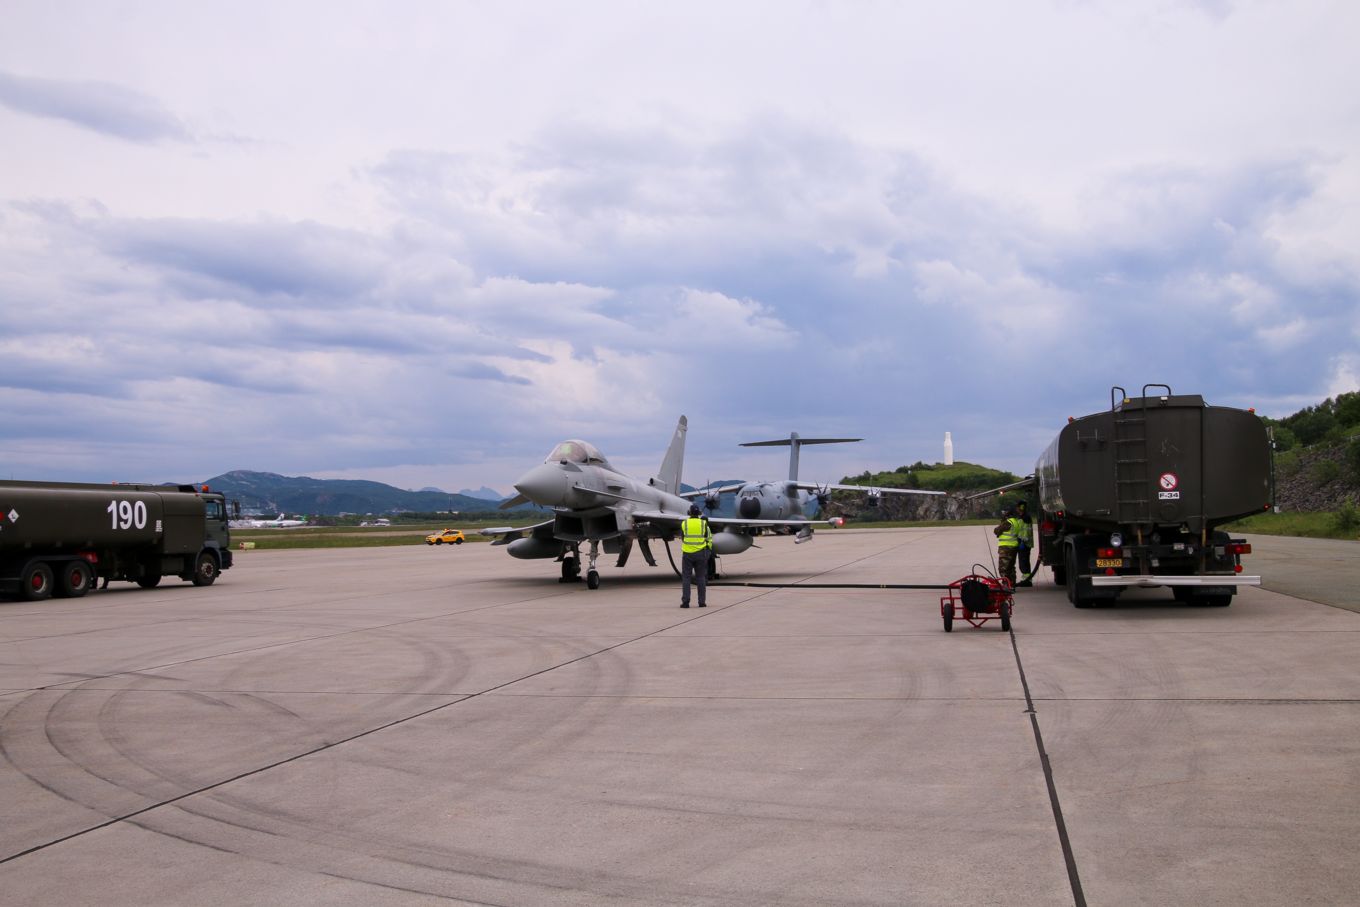 Typhoon aircraft being refuelled on the ground, with fuelling vehicles and A400M Atlas in the background.. 